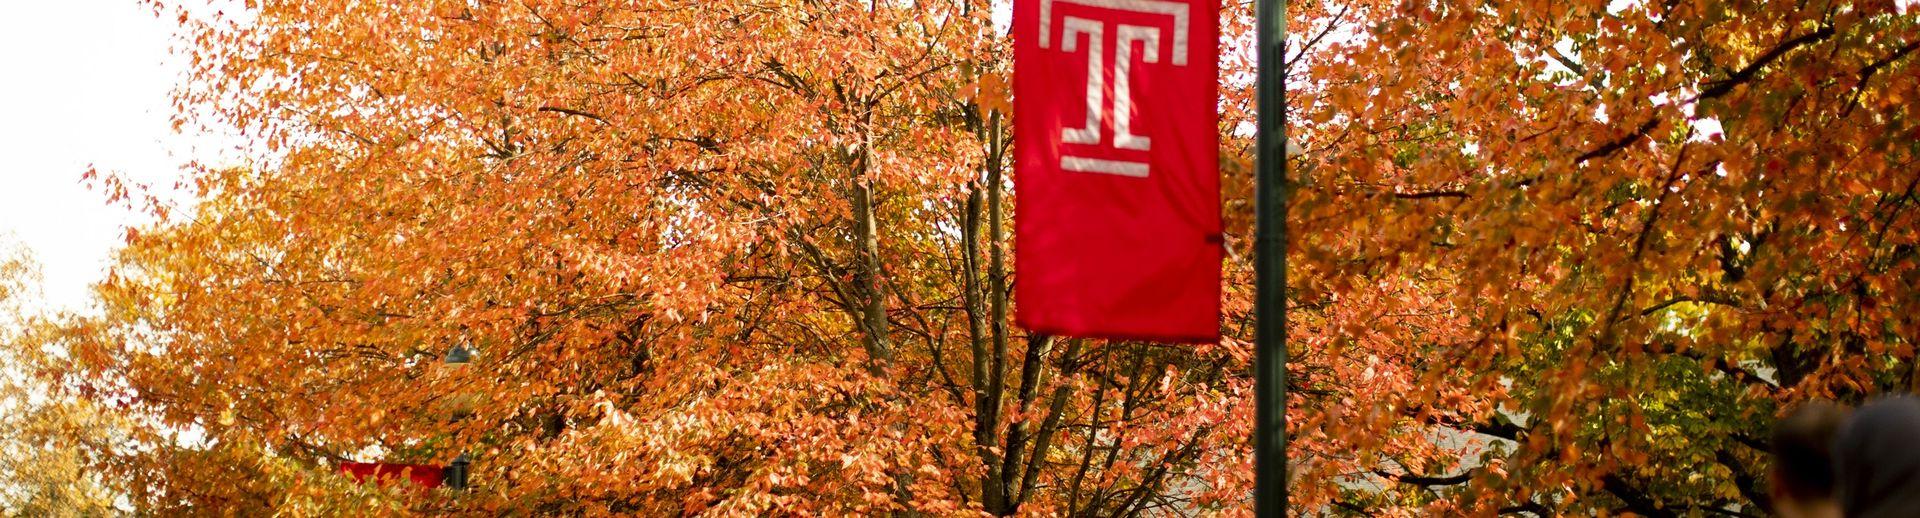 Students walking under a Temple T flag and trees with colorful autumn leaves